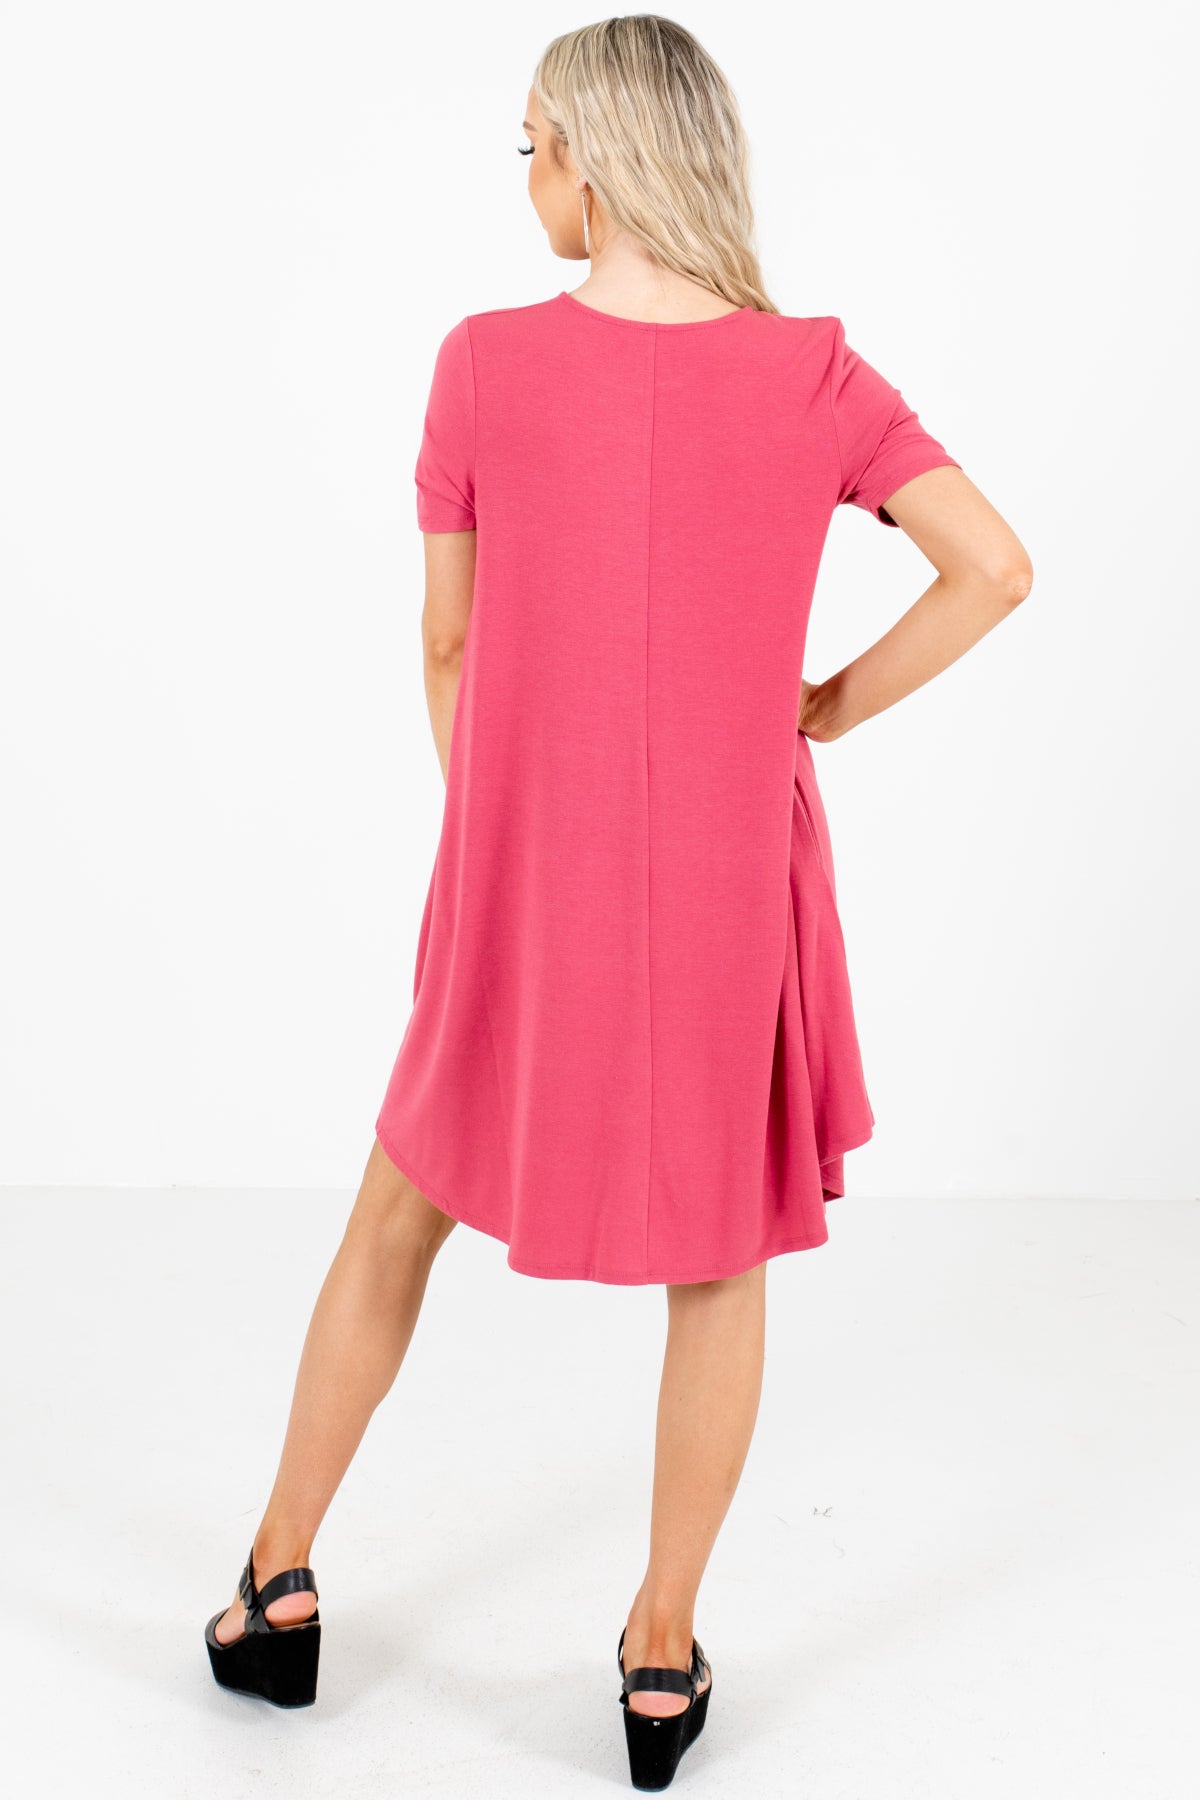 Women's Pink Casual Everyday Boutique Knee-Length Dresses